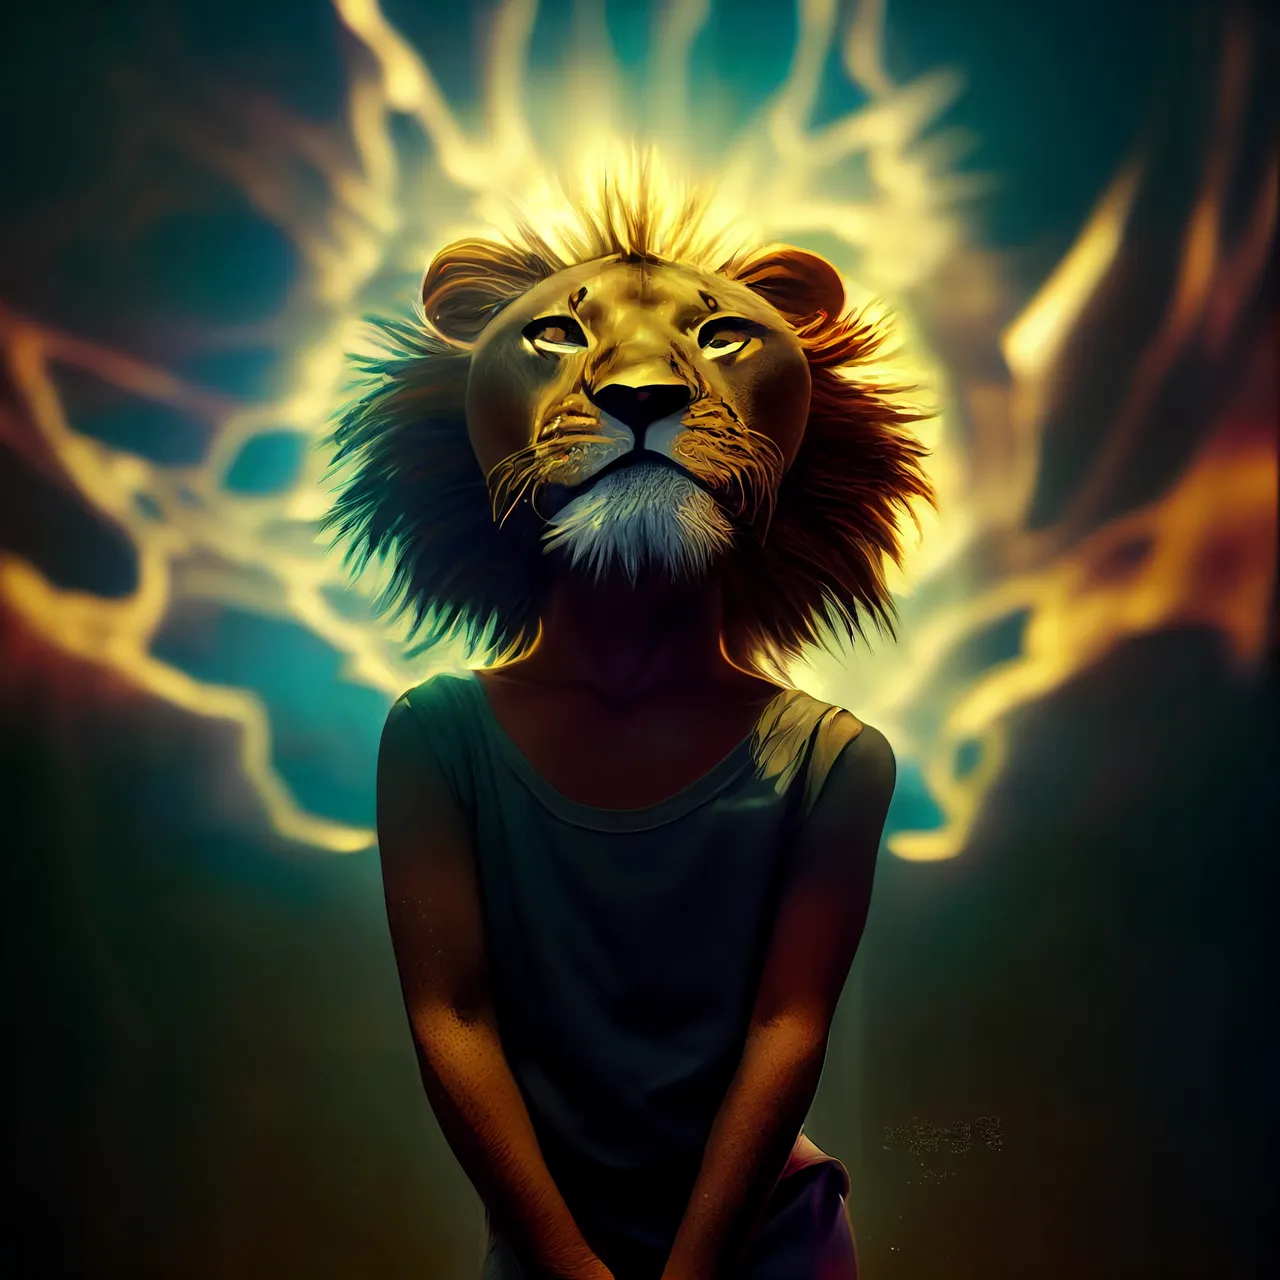 Ed_Privat_Aura_of_a_lion_coming_out_of_a_small_black_child_oil__57a04e2b-b52c-40bf-b99d-9deff890213f.png